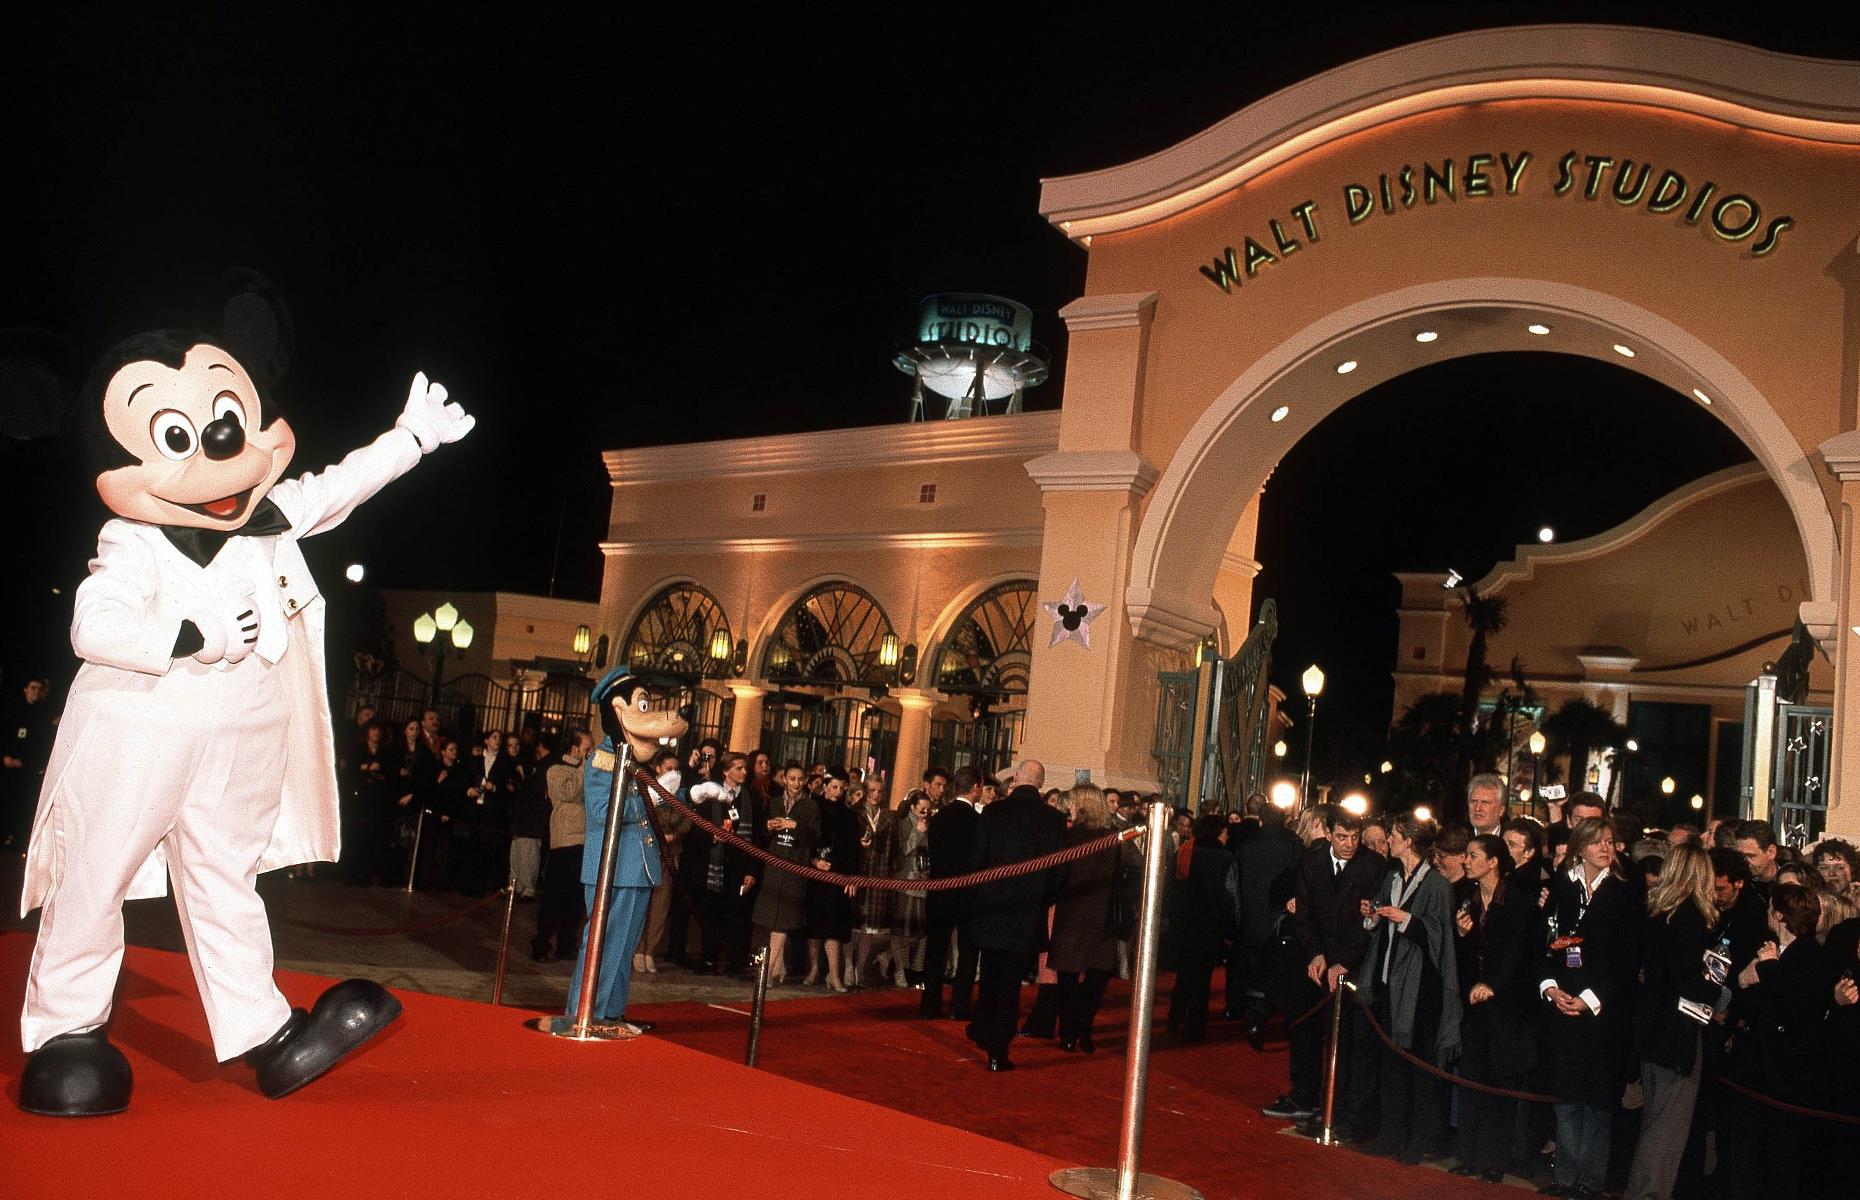 The year 2002 saw the opening of Walt Disney Studios Park, a glittering Disney park devoted to show biz, with attractions from Hollywood Boulevard to movie-themed rides. Here, suited and booted, Mickey Mouse and Goofy welcome guests to the Studios' inauguration.